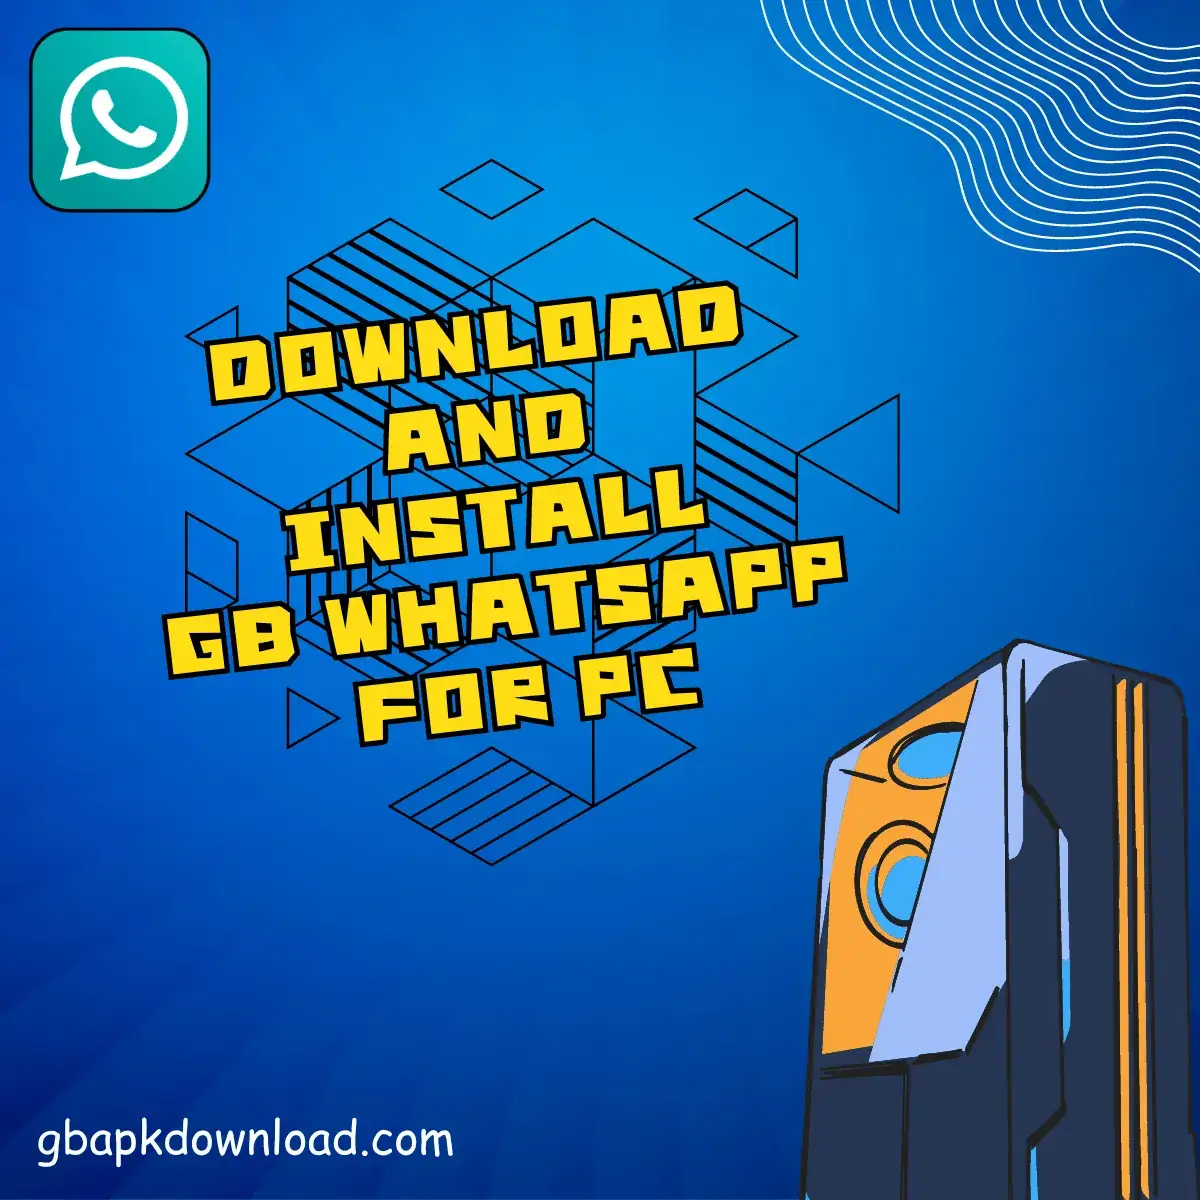 Download and install GB WhatsApp for PC